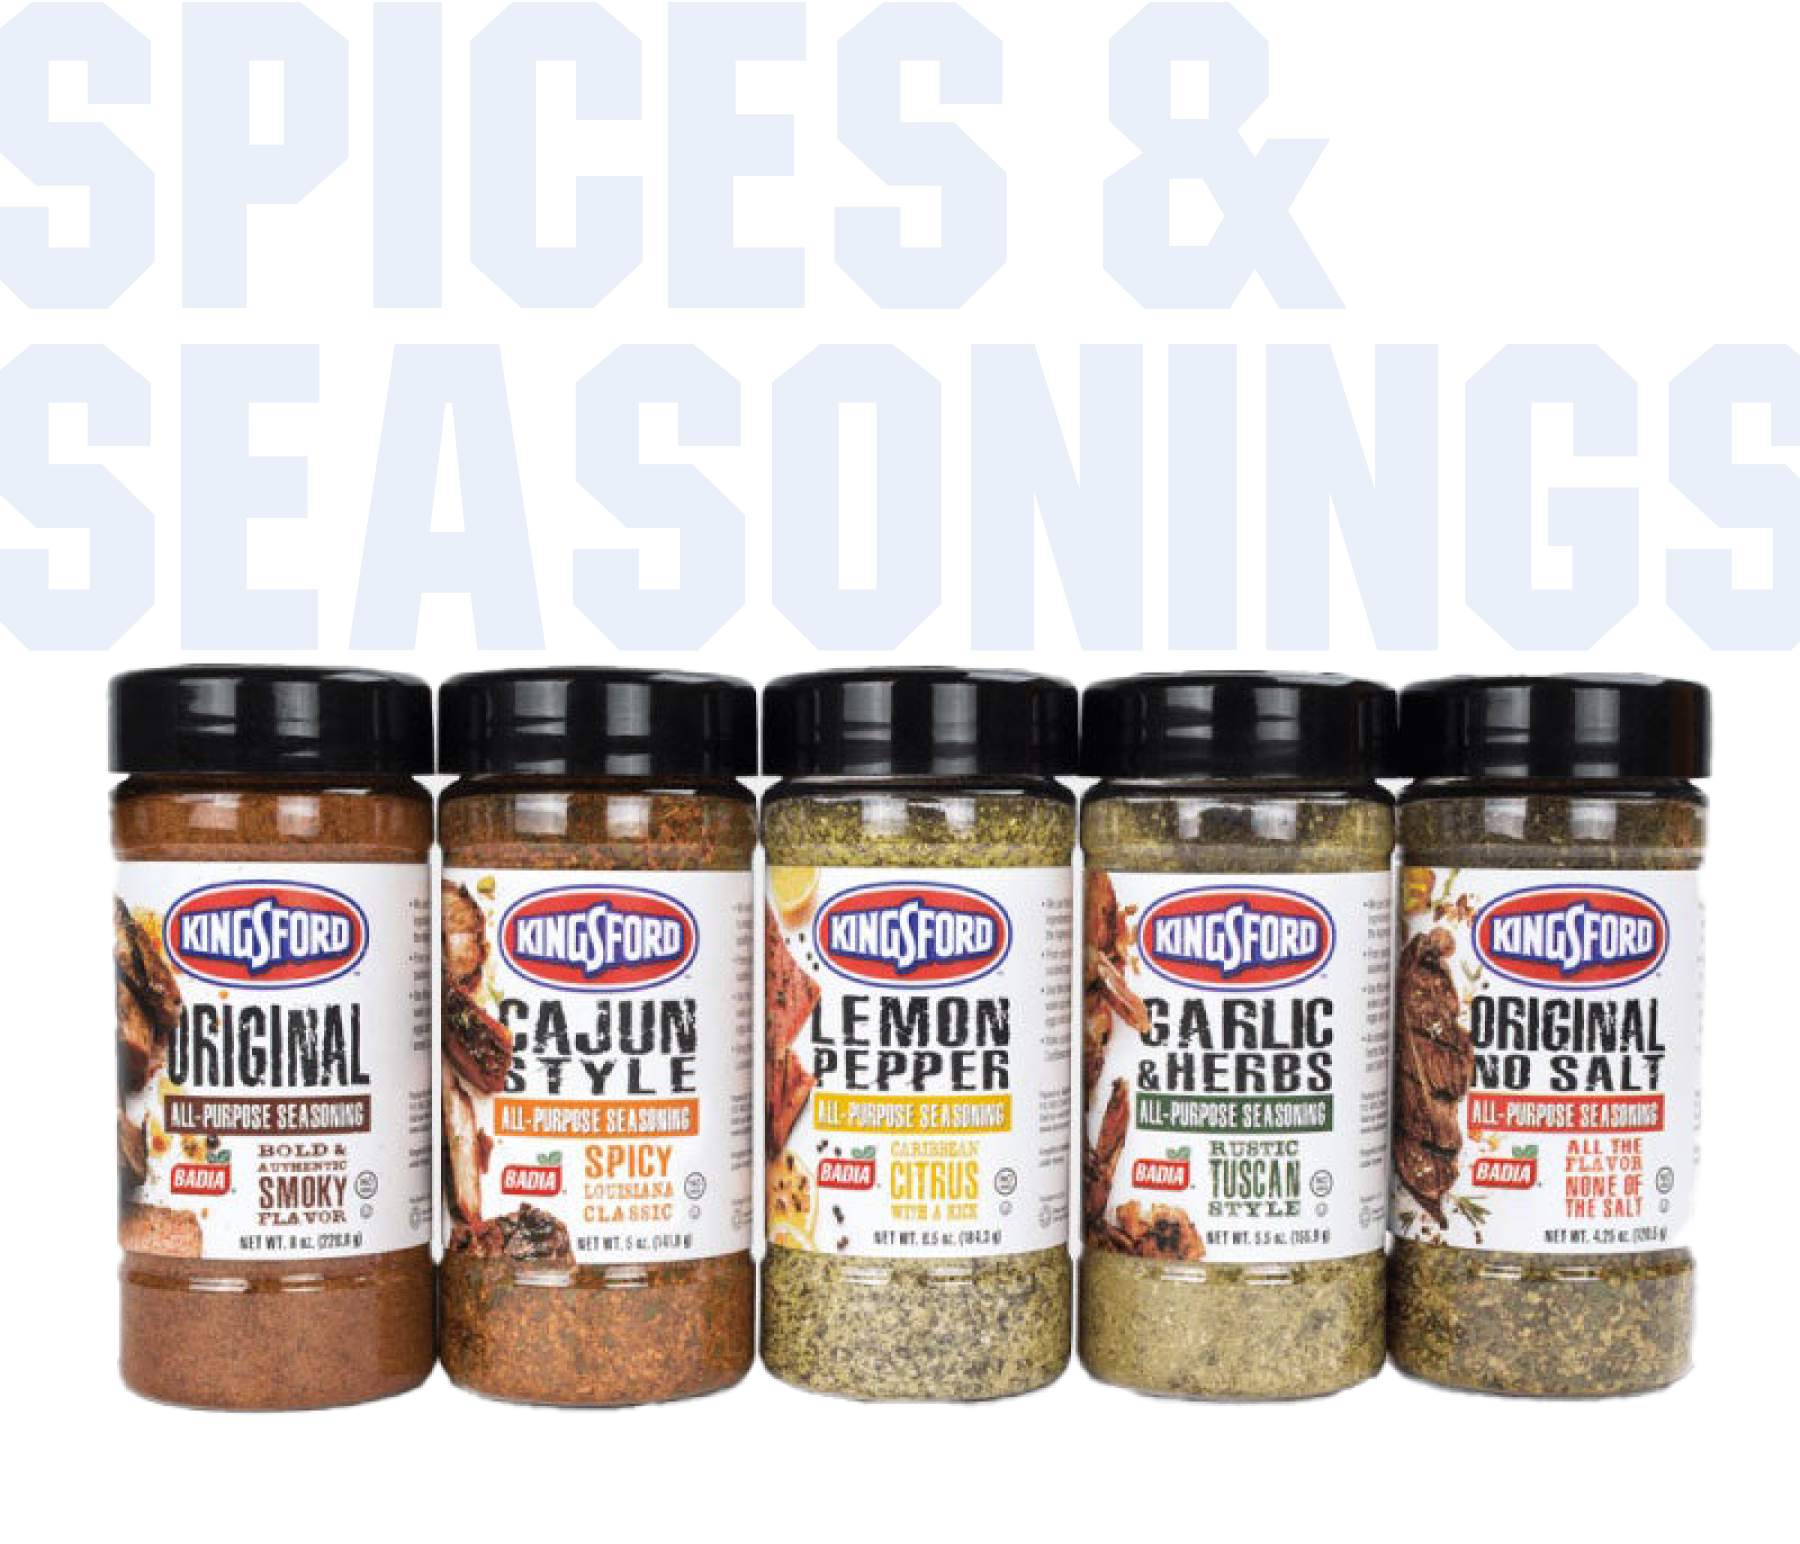 Traeger pellet grill rub, shake, spice. You choose the flavor